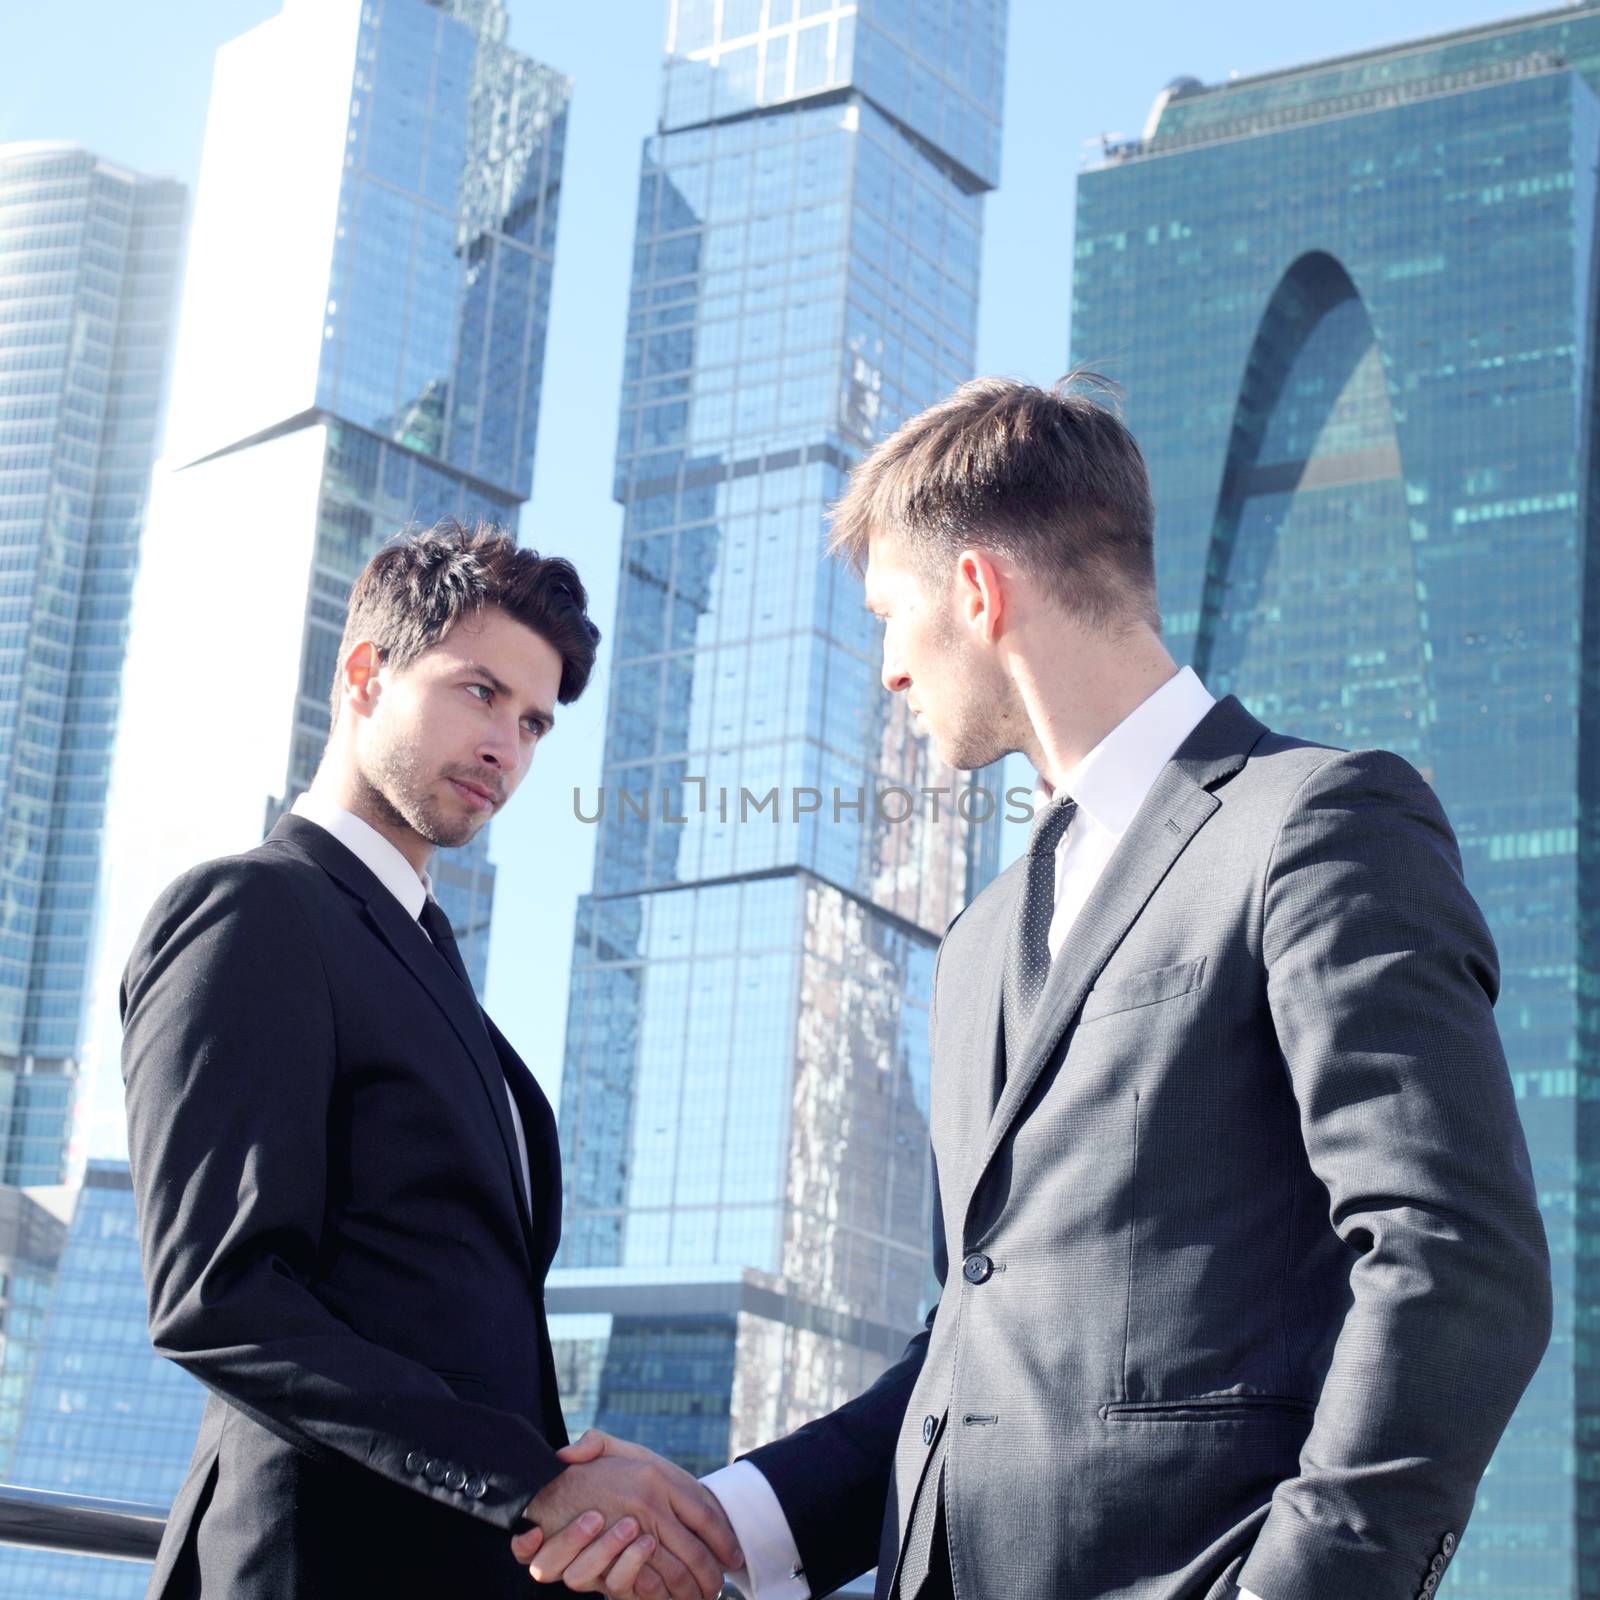 Business people shaking hands on skyscraper background